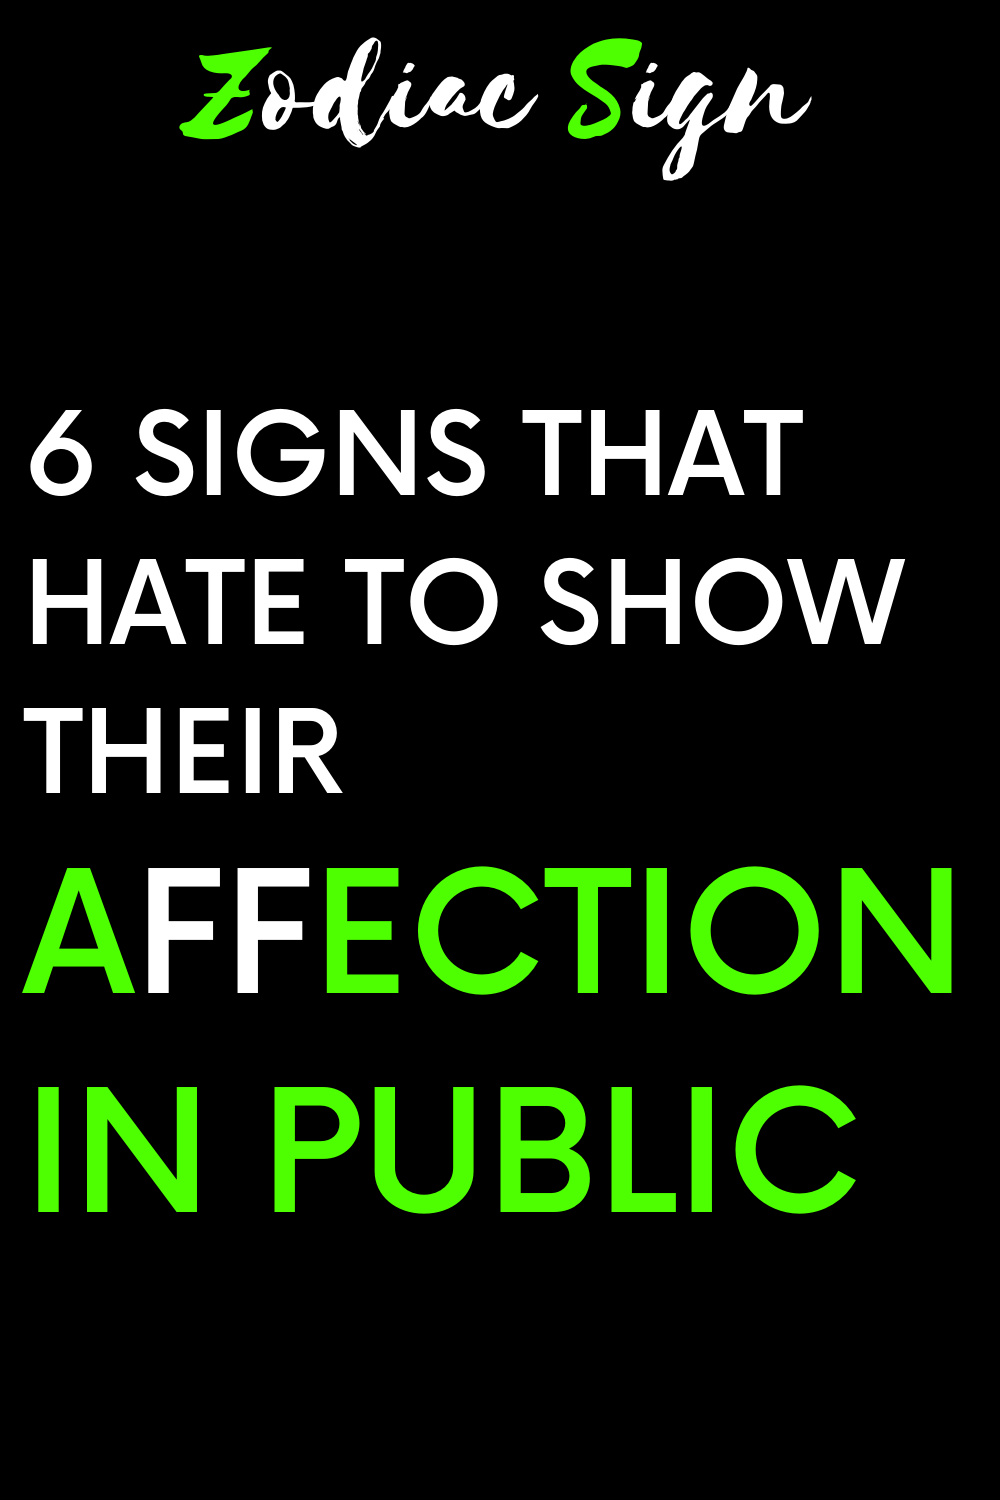 6 signs that hate to show their affection in public